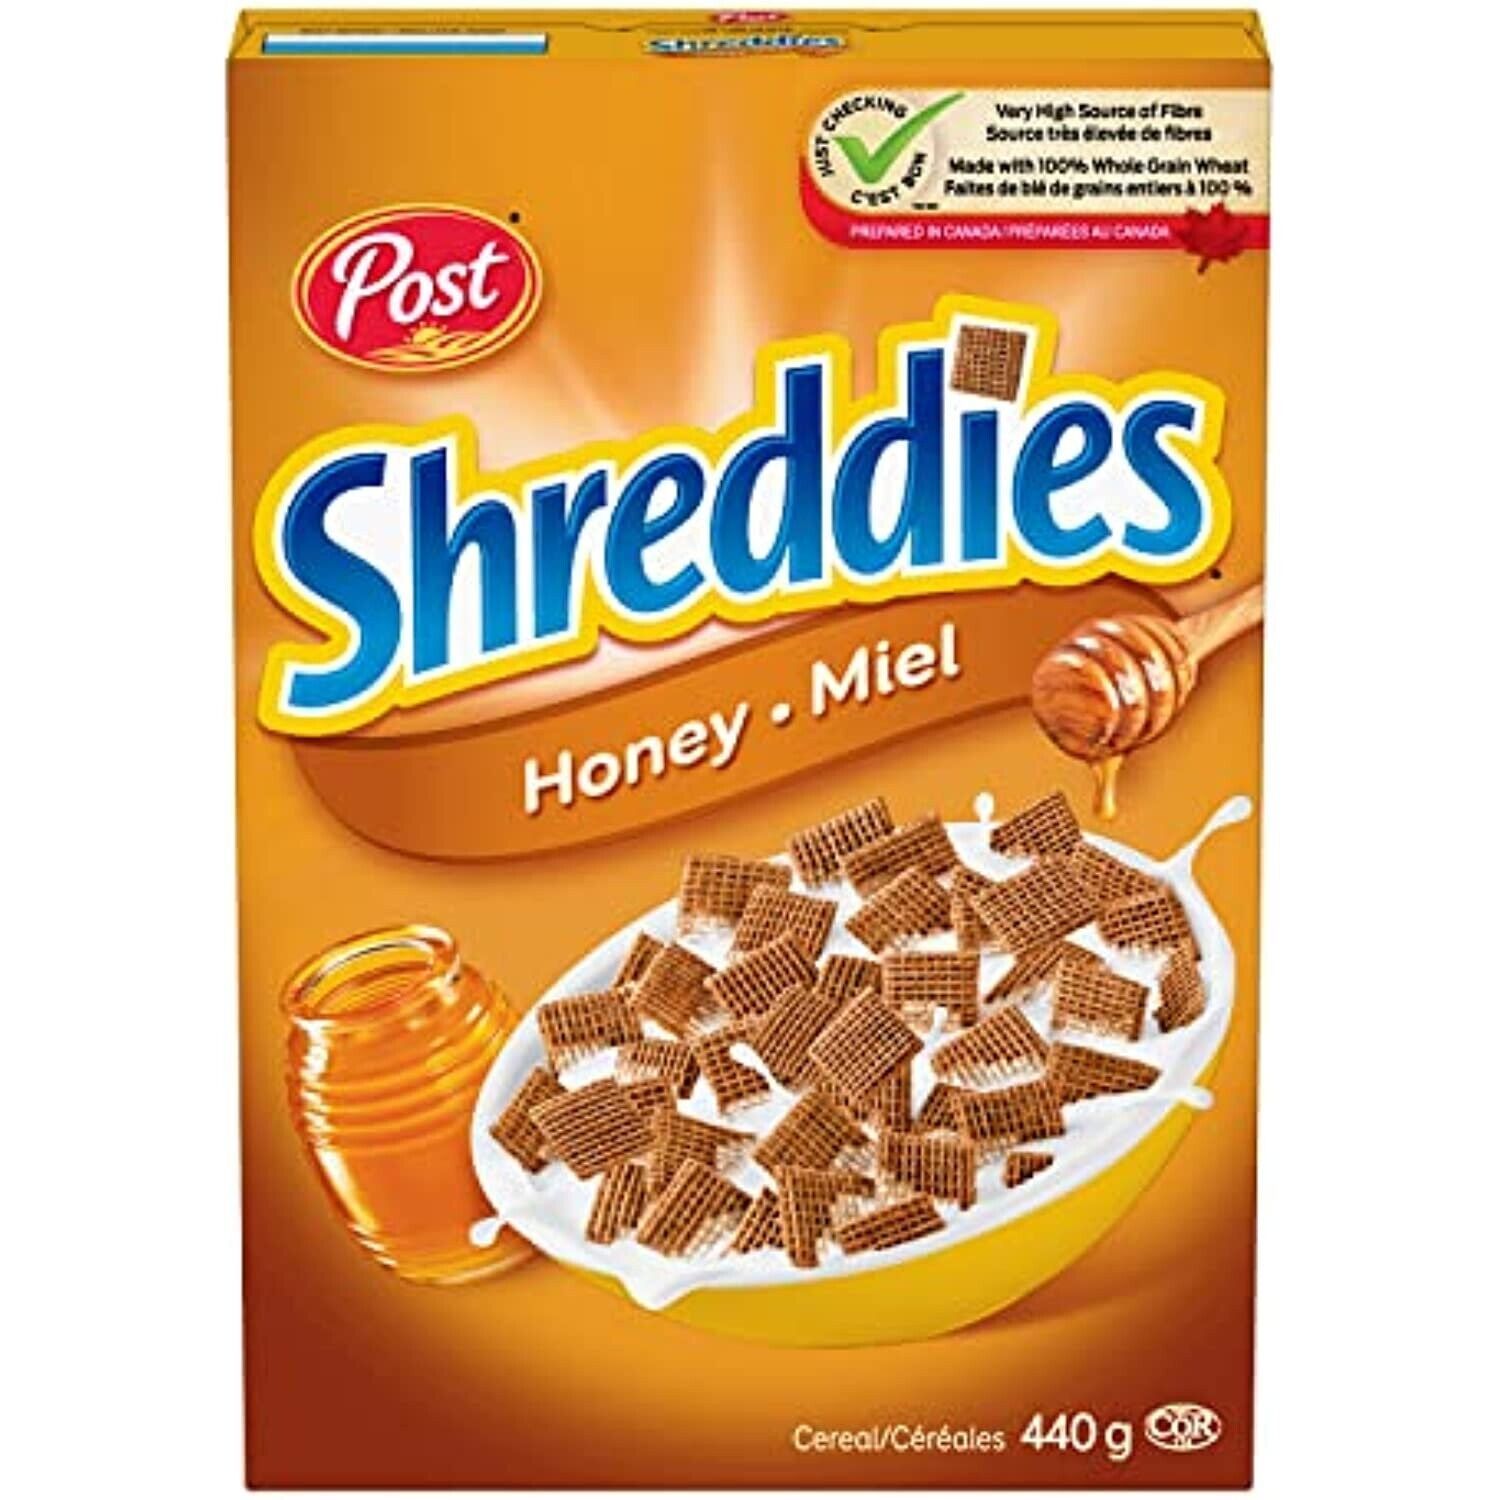 4 Boxes of Post Honey Shreddies Cereal 440g / 15.4 Oz. Each - Free Shipping - $44.51